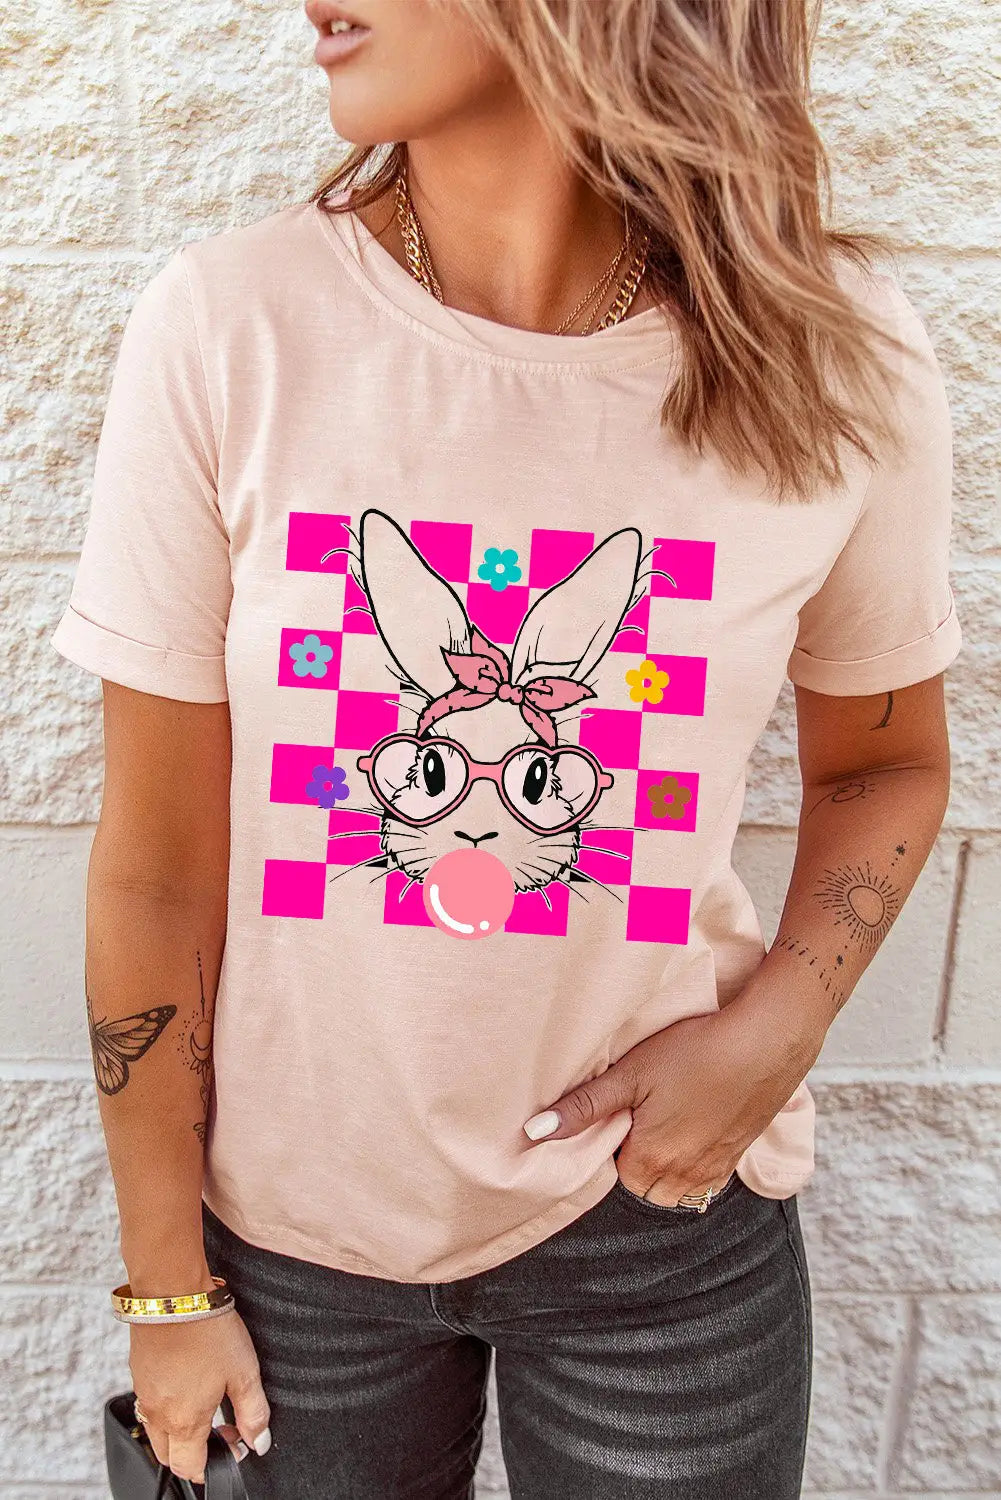 Pink easter rabbit checkered flower print o - neck t shirt - s 62% polyester + 32% cotton + 6% elastane graphic t